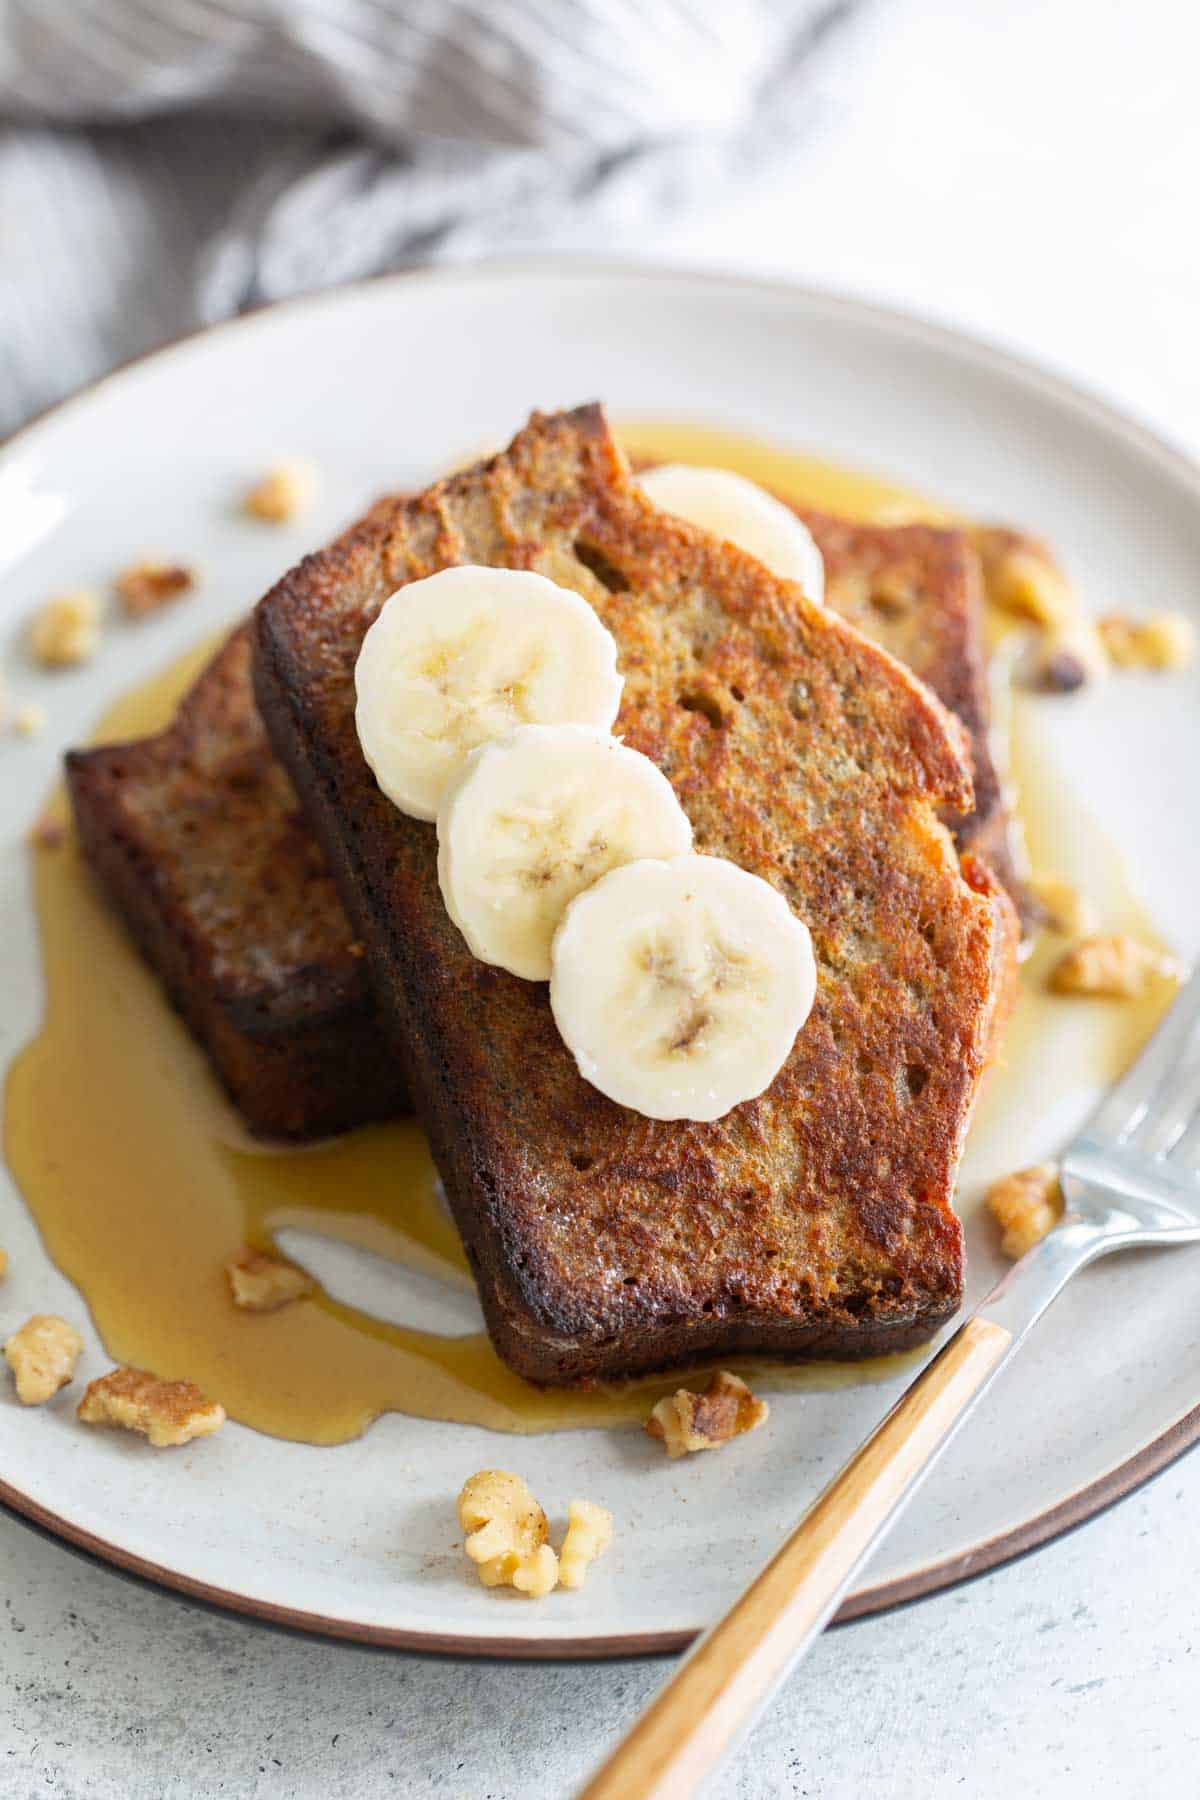 French toast with bananas and walnuts on a plate.